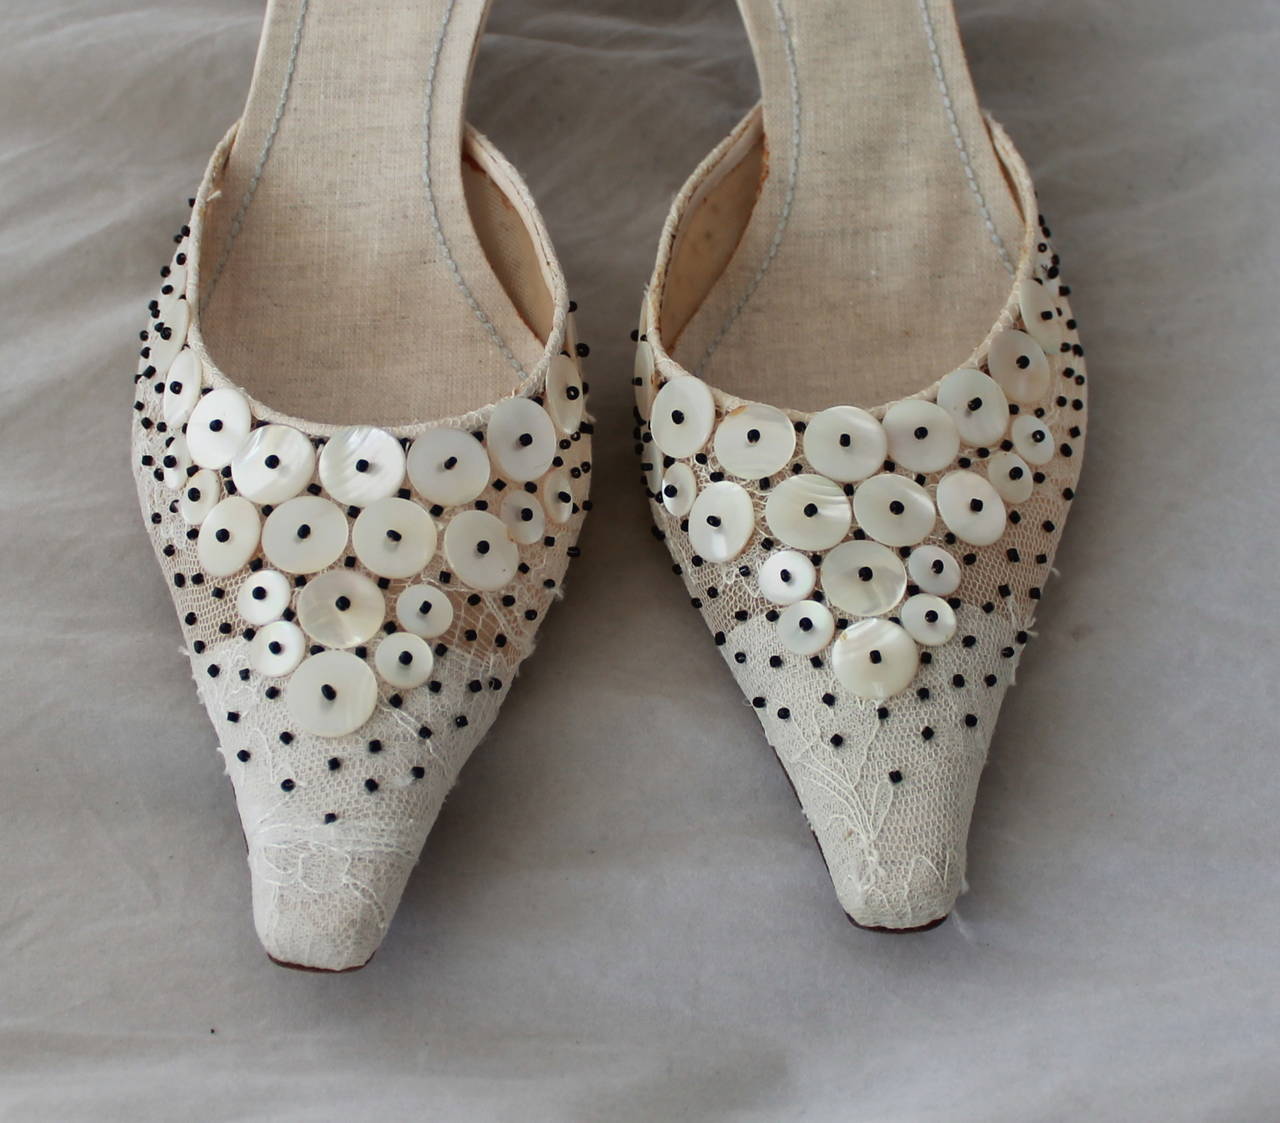 Rene Caovilla Ivory Lace & Mother of Pearl Beaded Heels - 40. This heels are in excellent condition and have never been worn, however there is some markings on the inside due to age (image 4). The shoe has a pointed toe with a low heel. The bottom